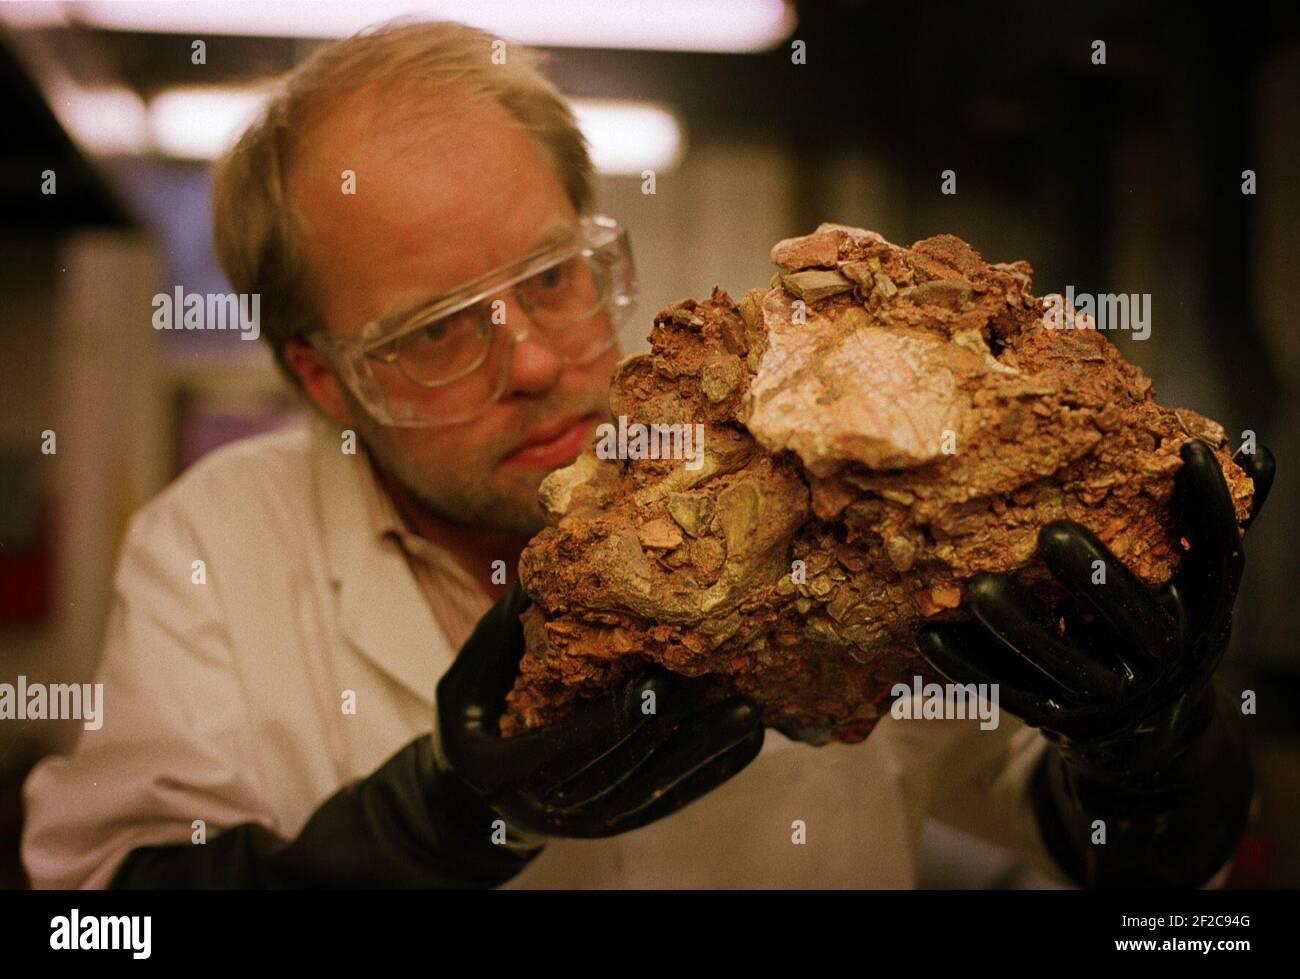 simon parfit of the national history museum lifts a block of breccia from an acid bath.it is composed of many animal bones and will be crucial in dating a flint hand axe. 23/9/01 pilston Stock Photo